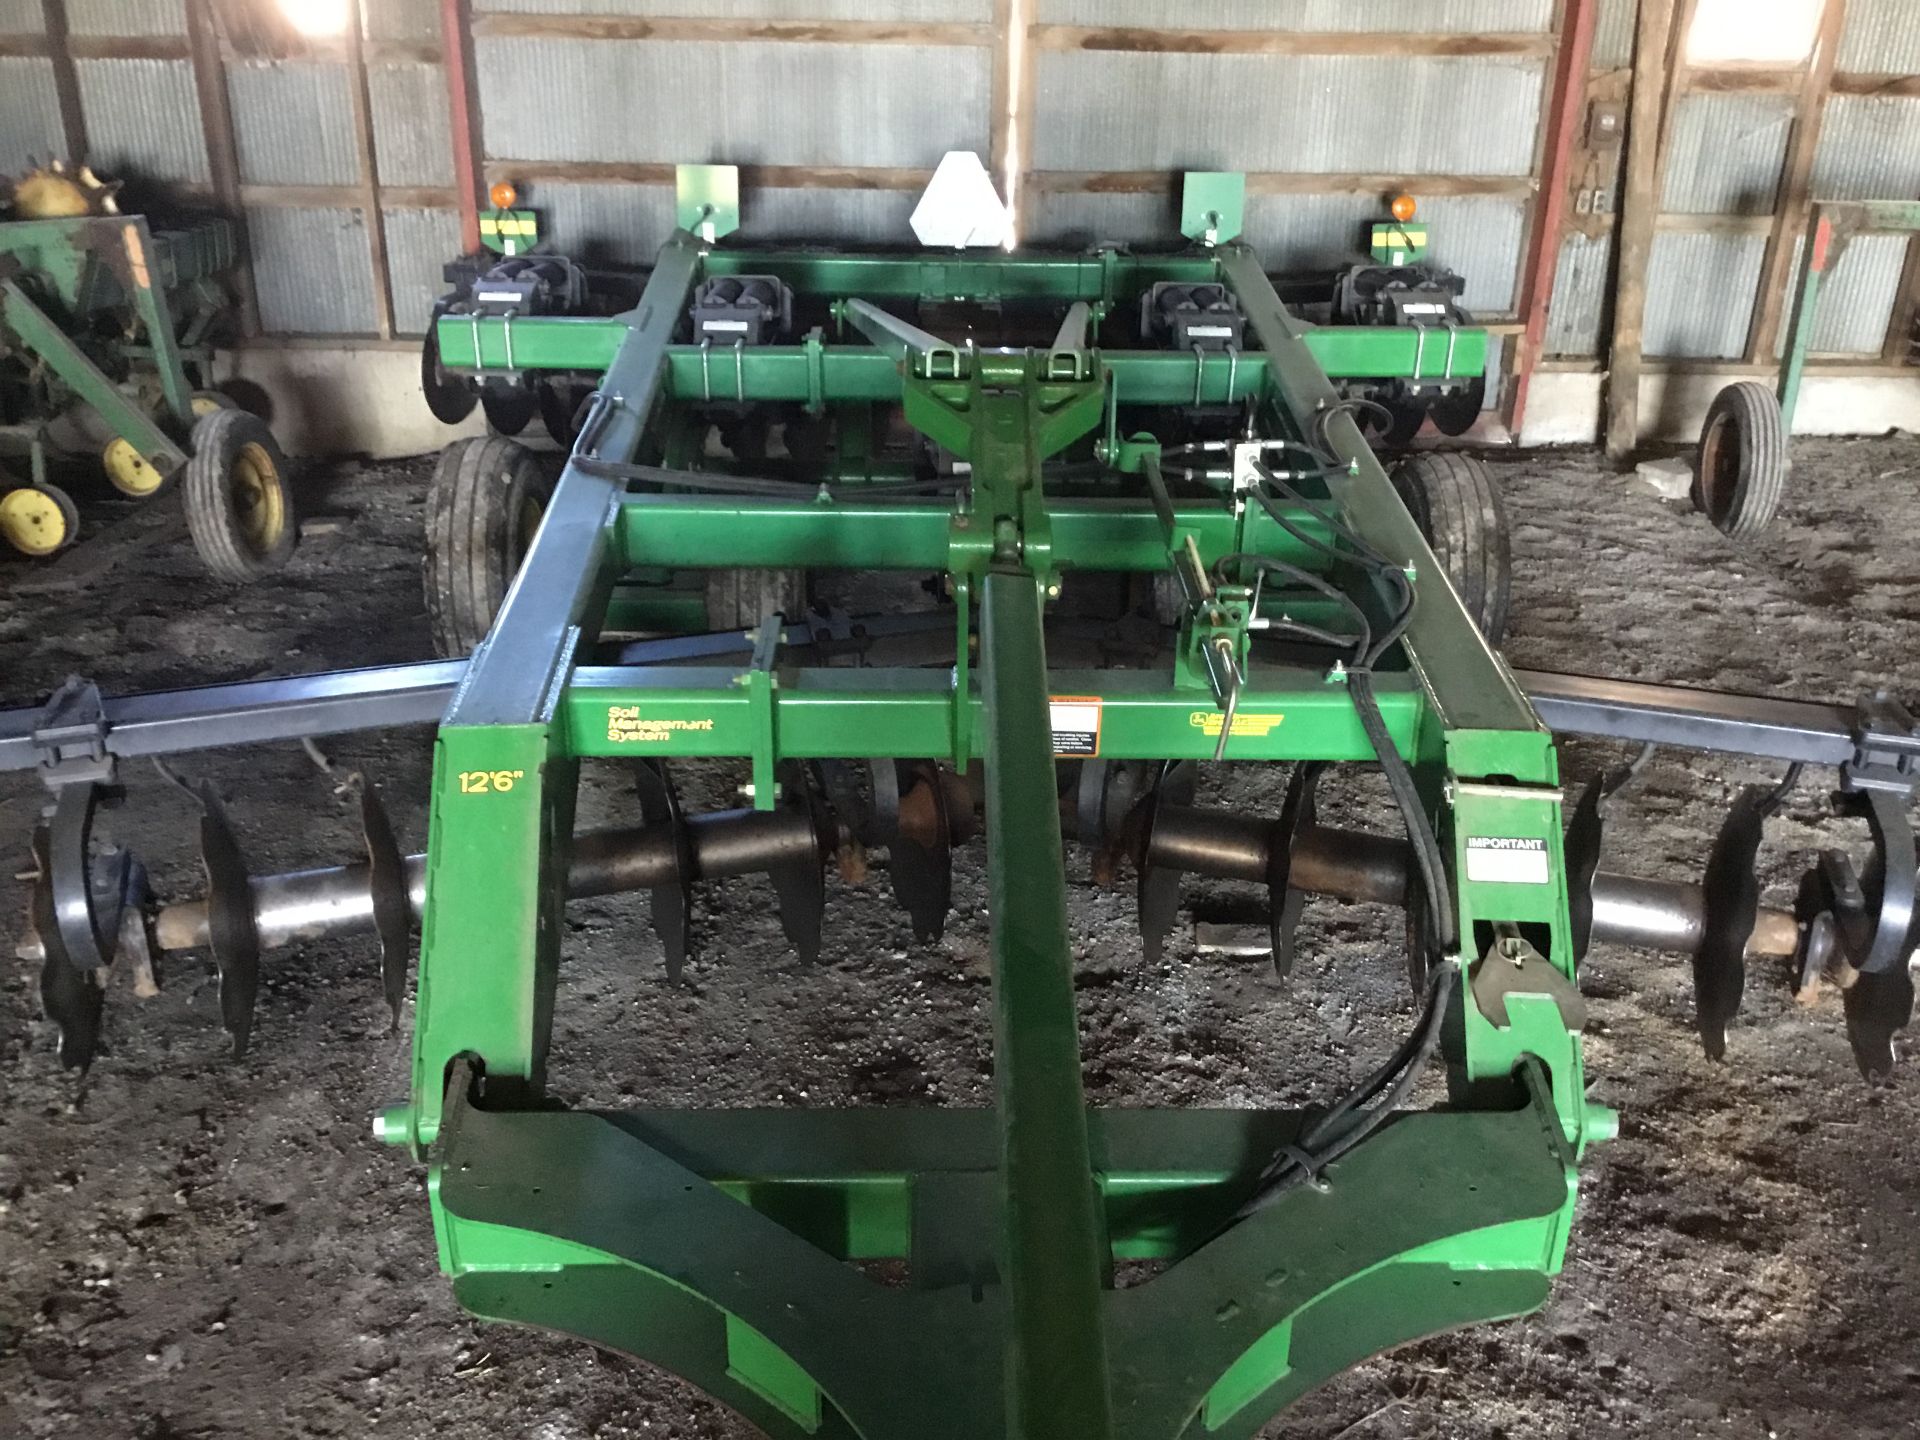 Jd 512 (12'6") Disc Chisel, 5 Shank, Notched Front Blades, SmoothBack Blades, Double Spring, Walking - Image 5 of 10